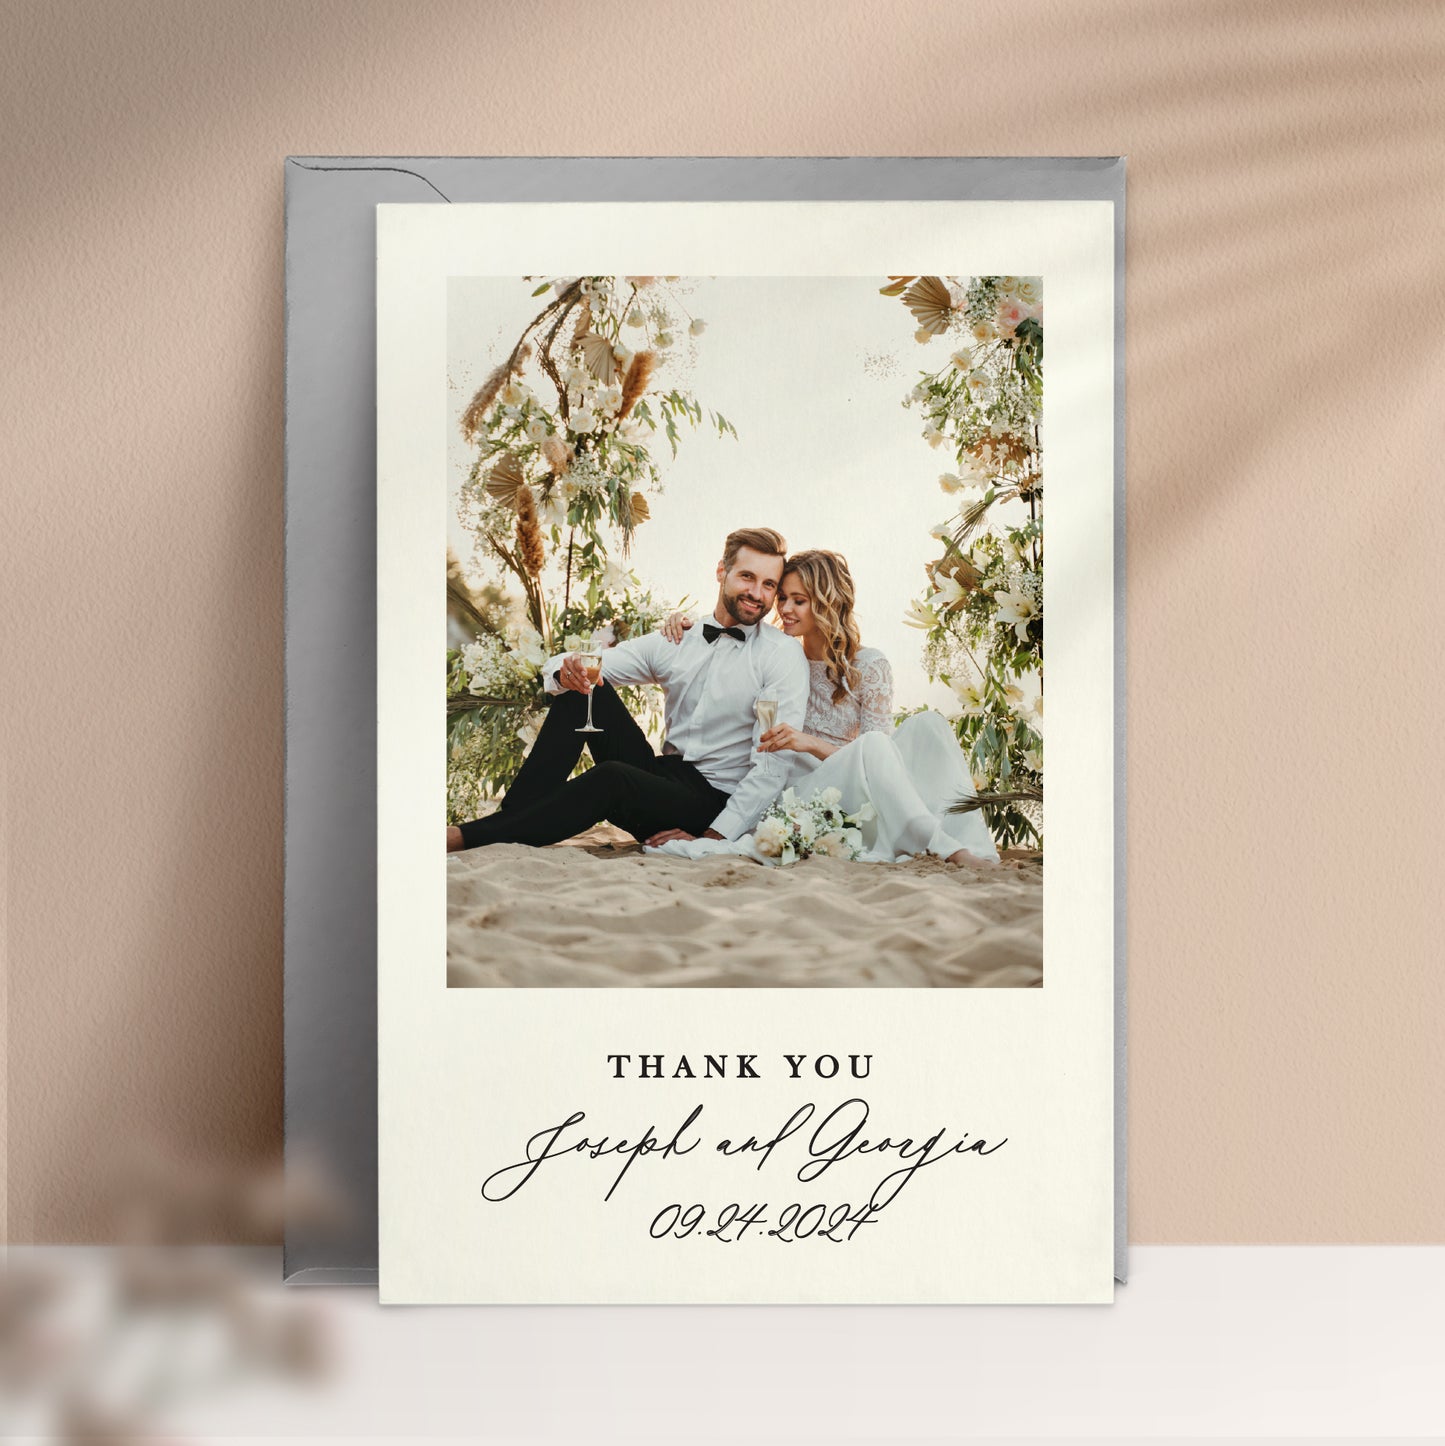 personalized wedding thank you card with custom photo, names and wedding date - XOXOKristen